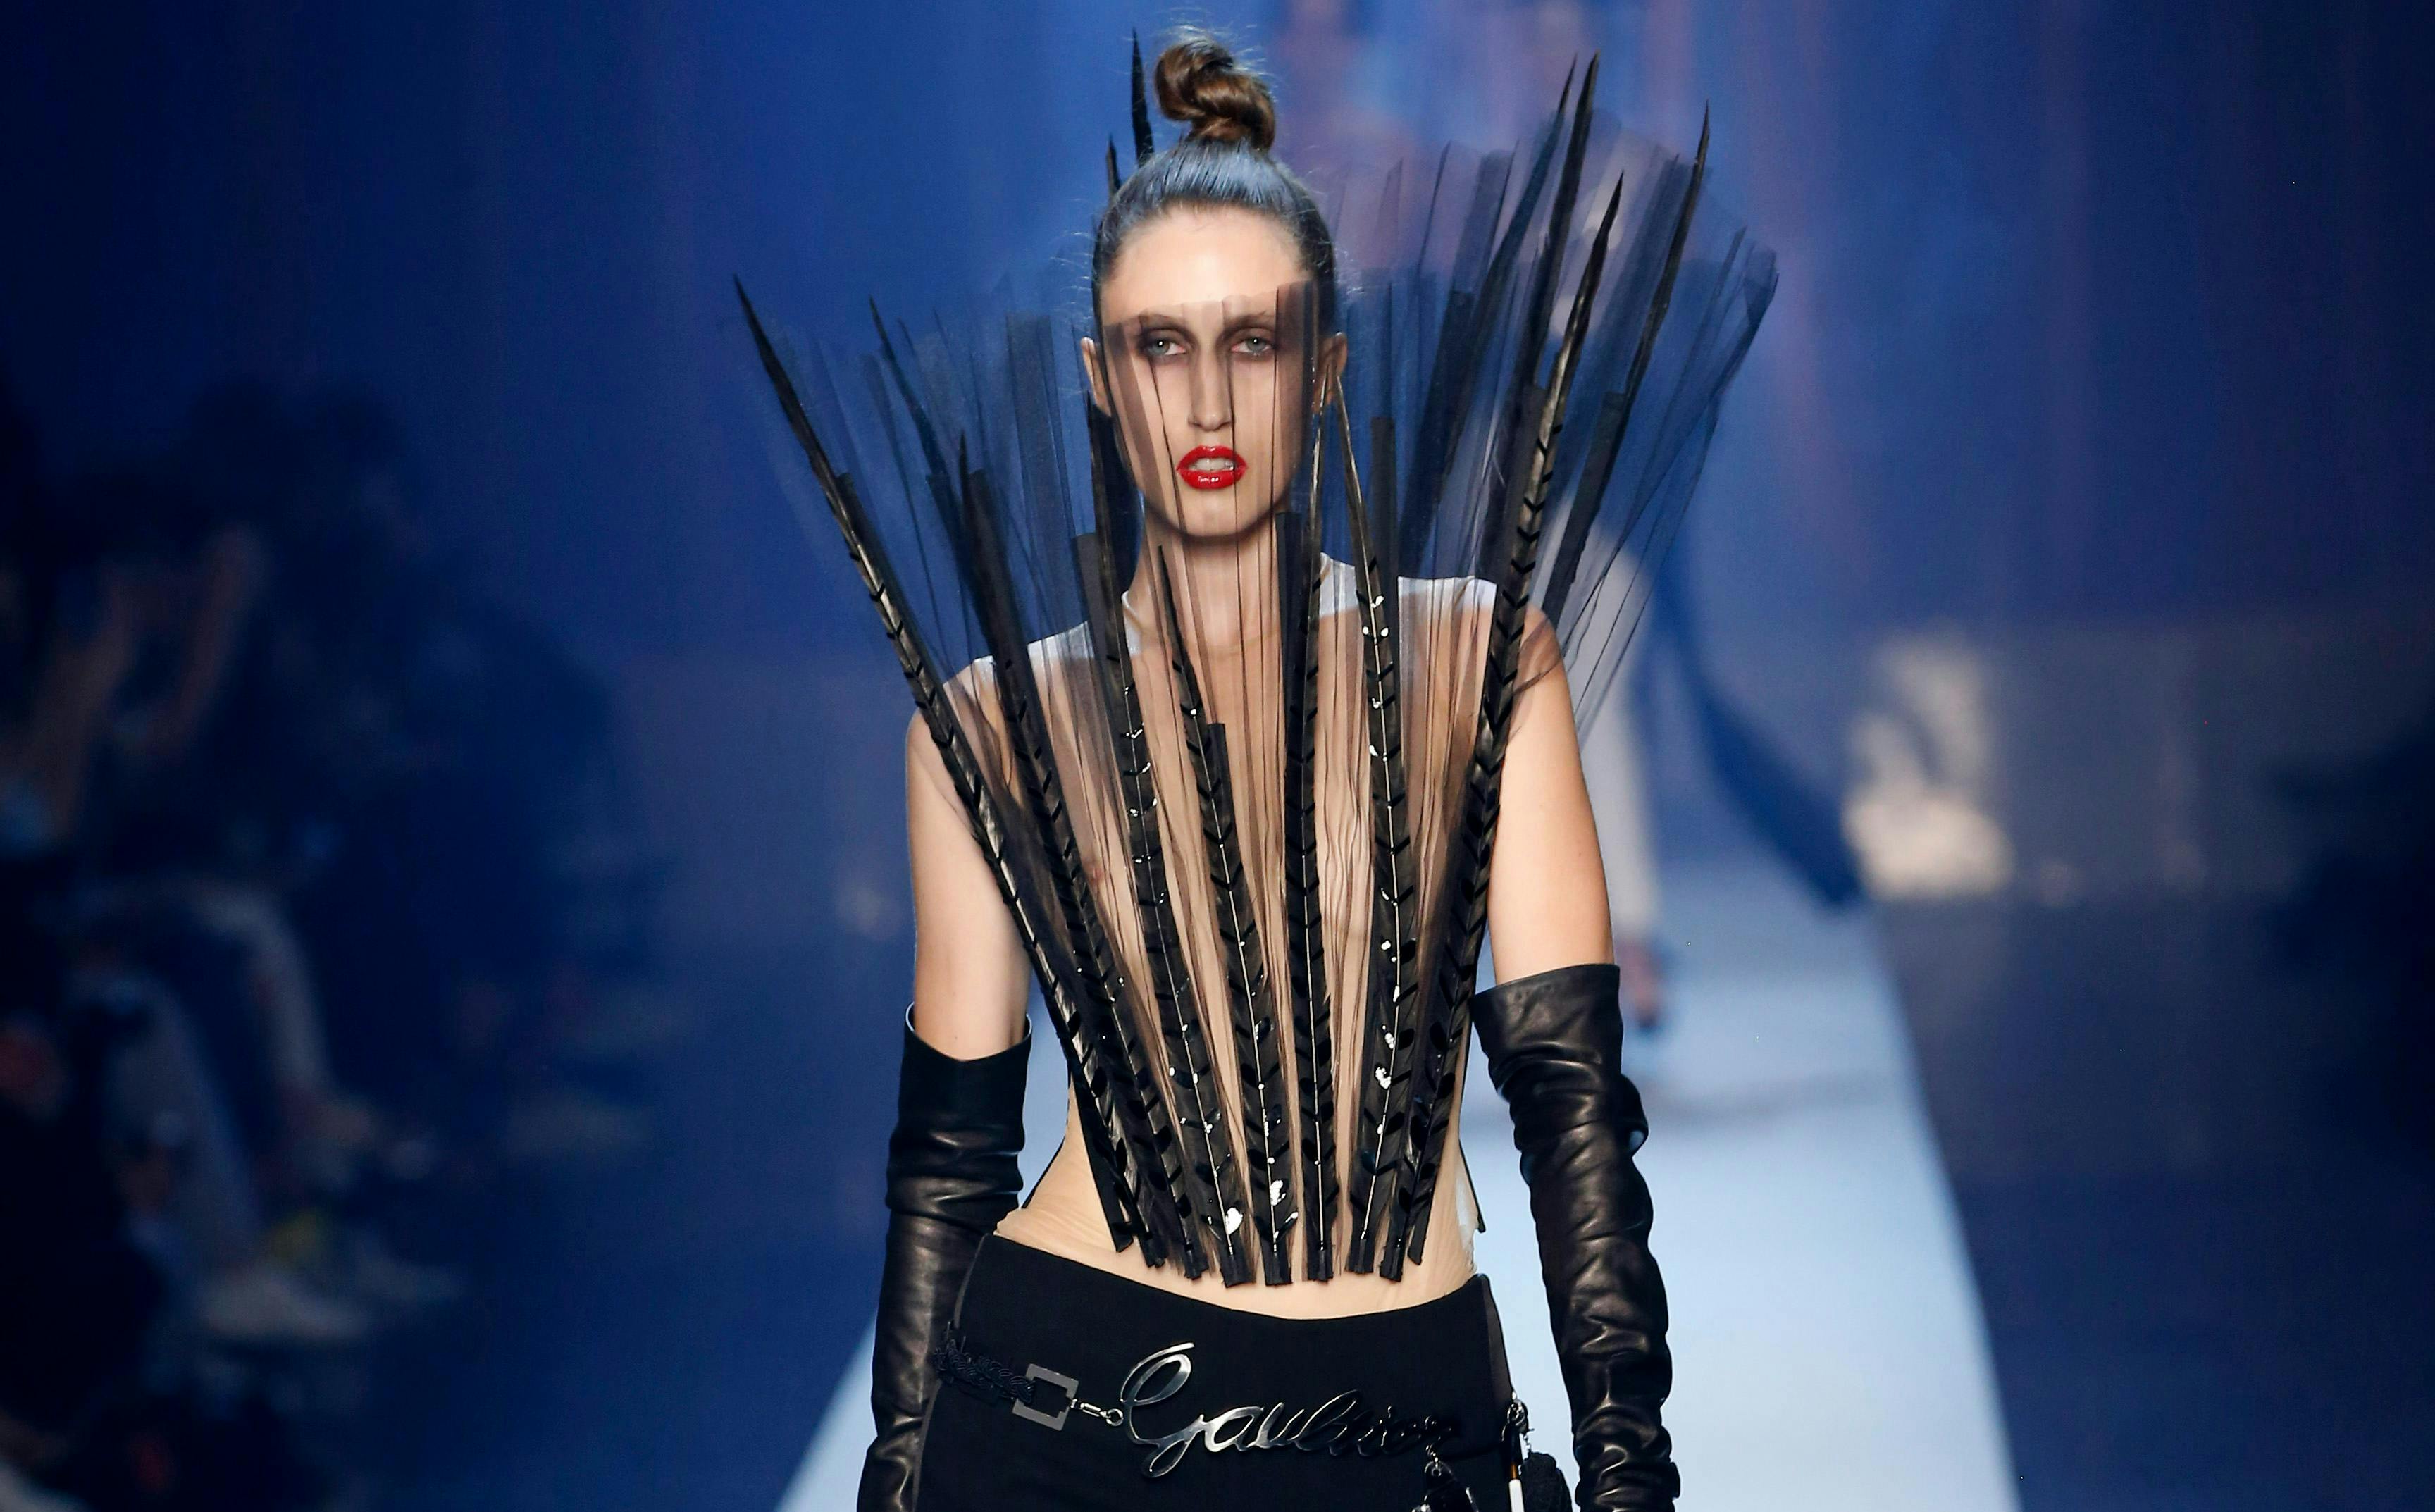 jean paul gaultier _haute couture fall winter 2018-ed19 _paris couture july 2018_ person human